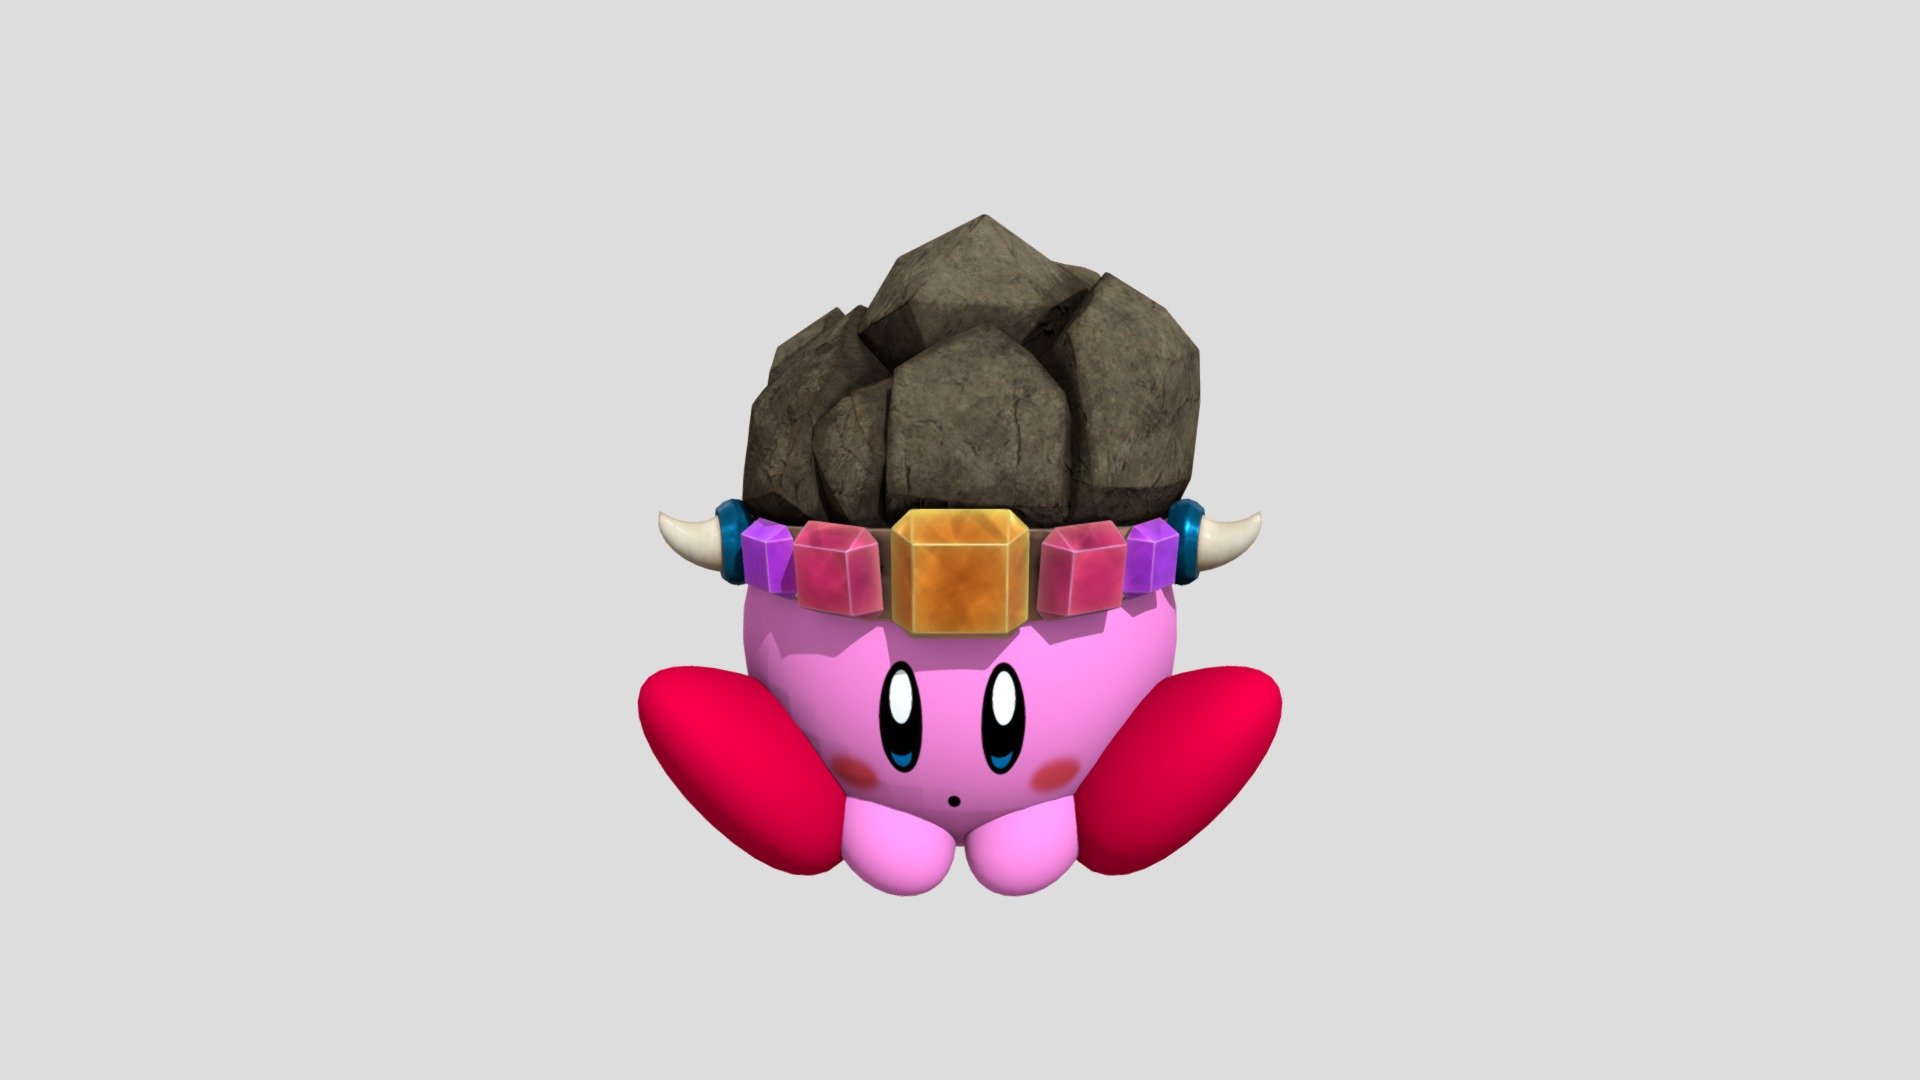 Stone Kirby model with PBR properties 3d model